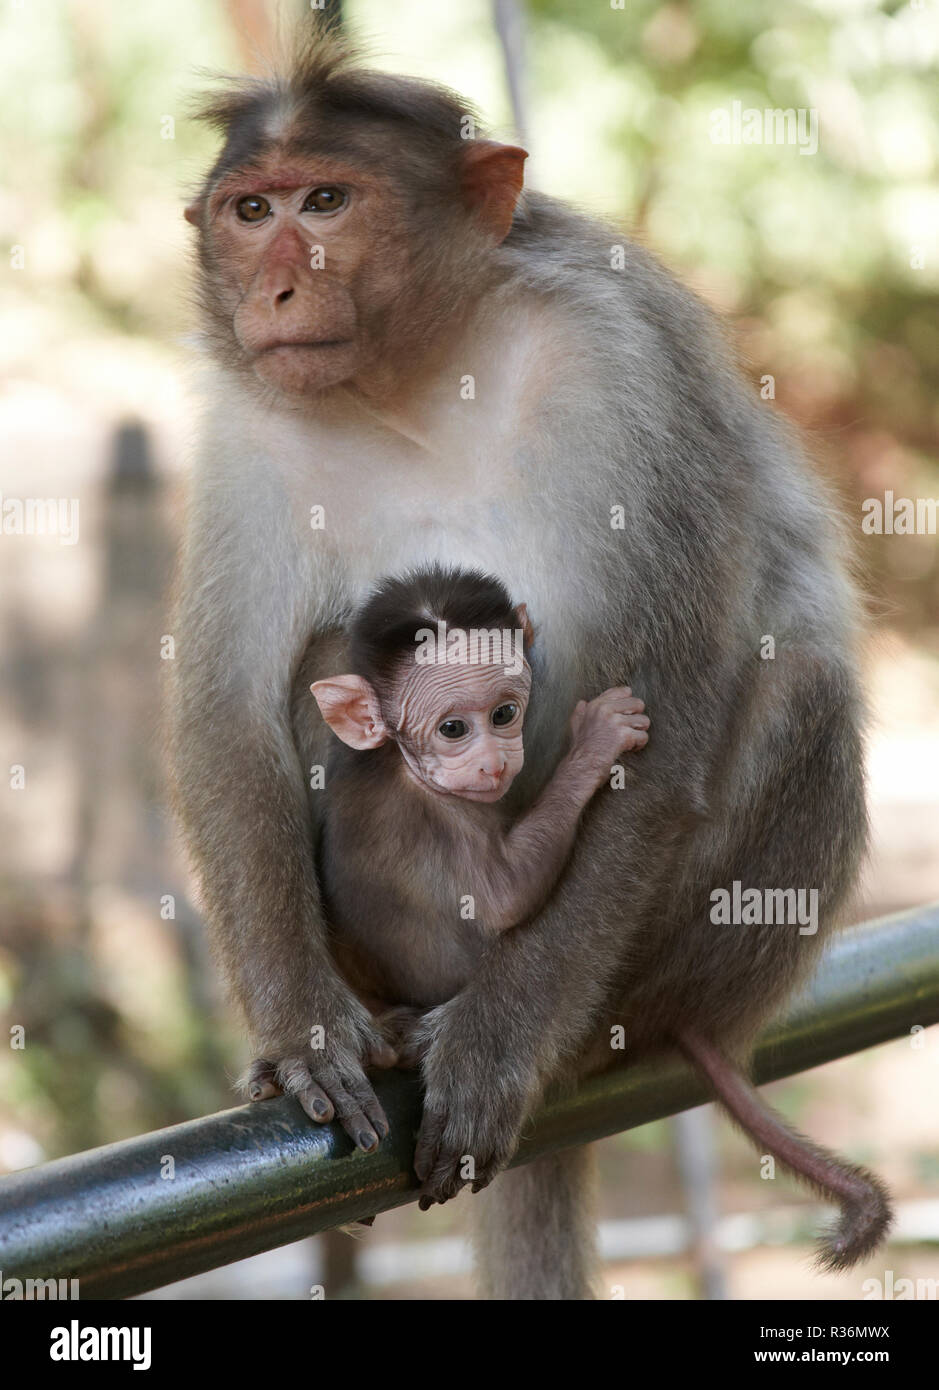 Bonnet Macaque Monkey With Baby Stock Photo